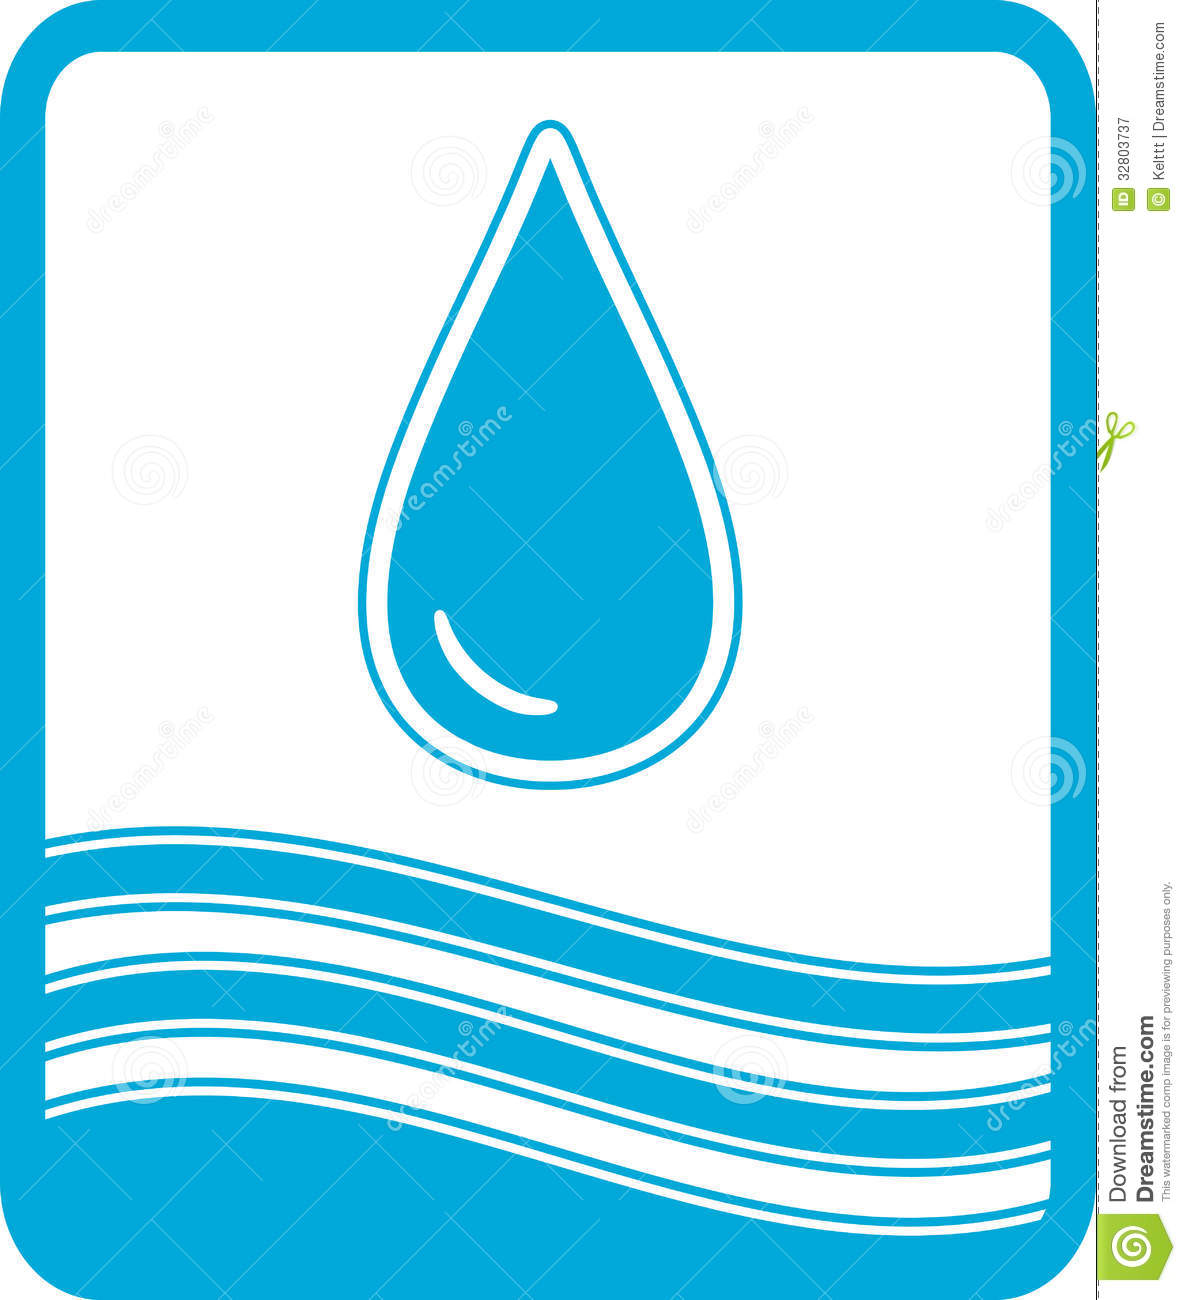 Symbol With Water Drop And Wave Royalty Free Stock Photography   Image